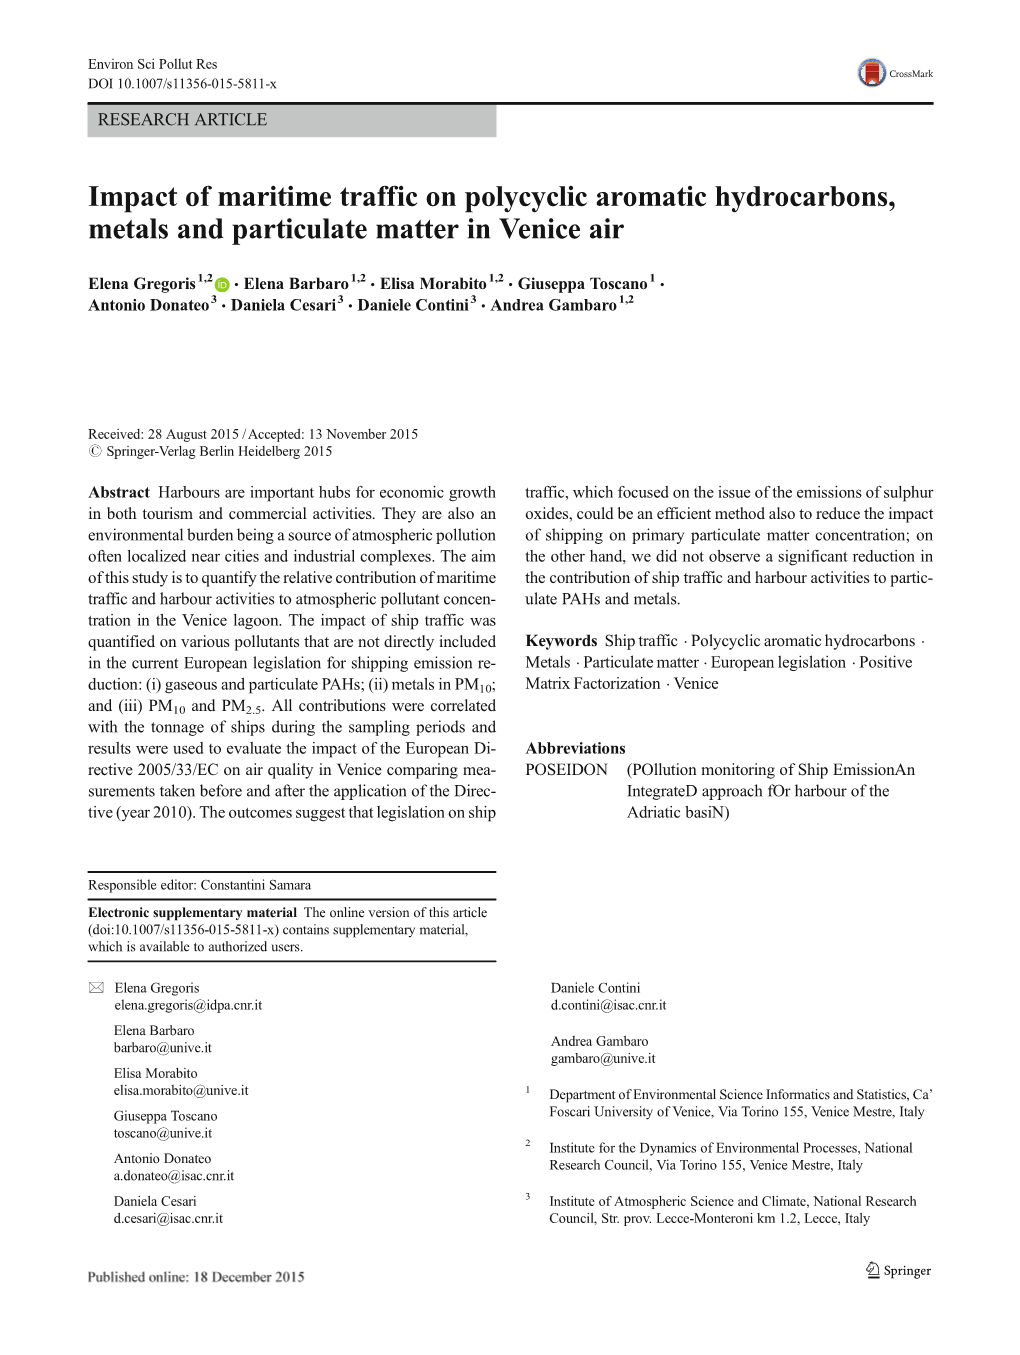 Impact of Maritime Traffic on Polycyclic Aromatic Hydrocarbons, Metals and Particulate Matter in Venice Air